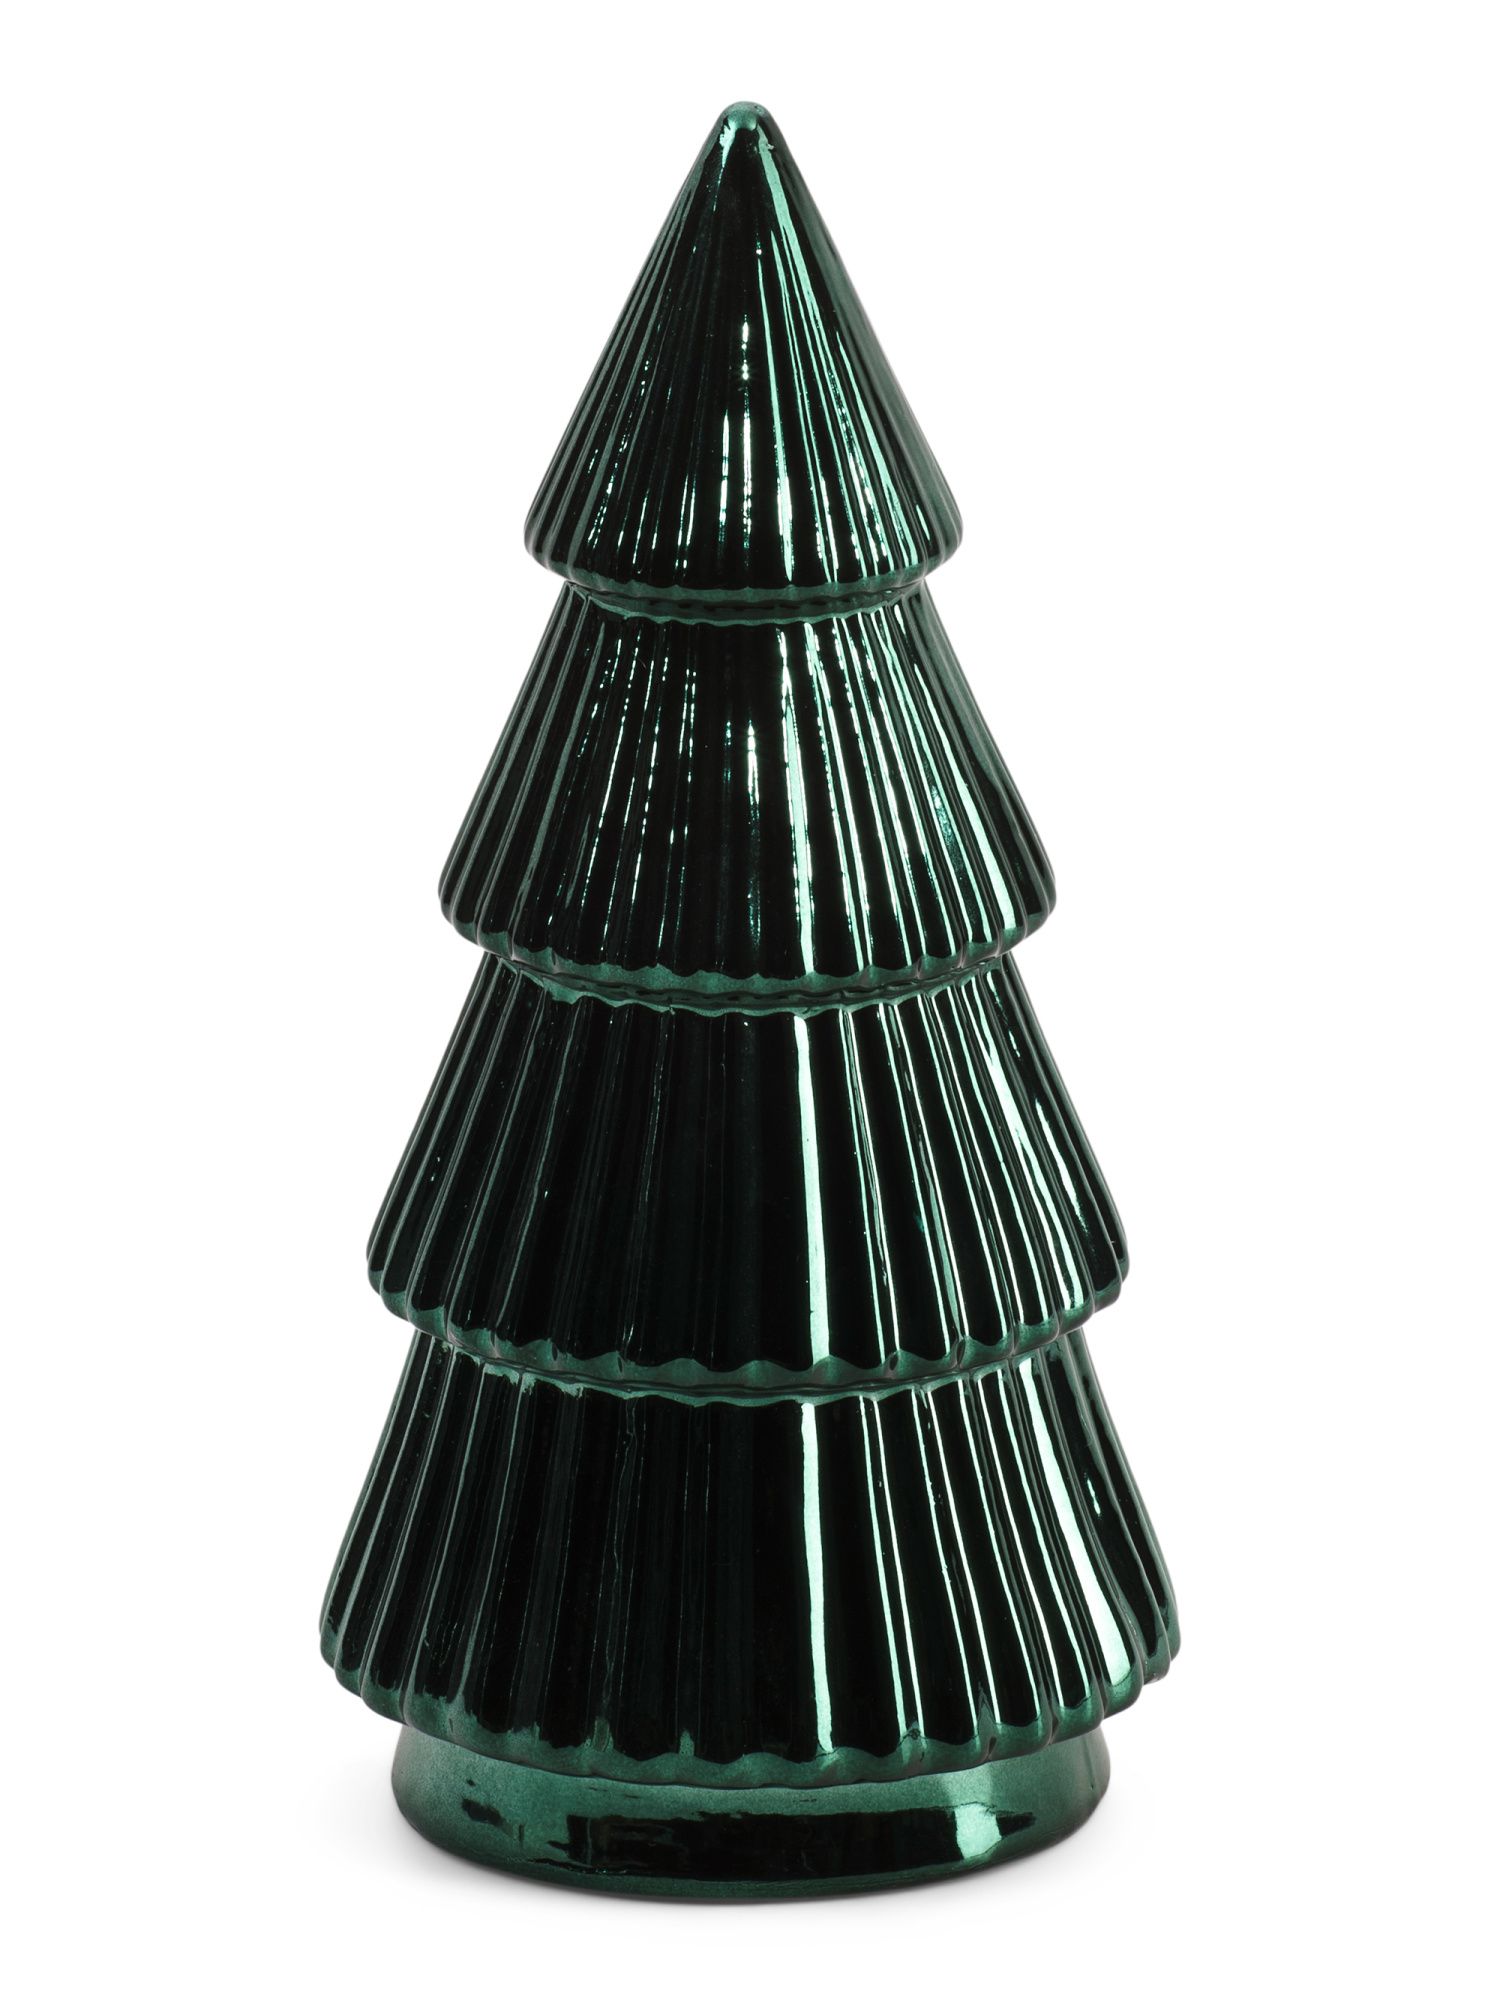 11in Porcelain Electroplated Tree | TJ Maxx